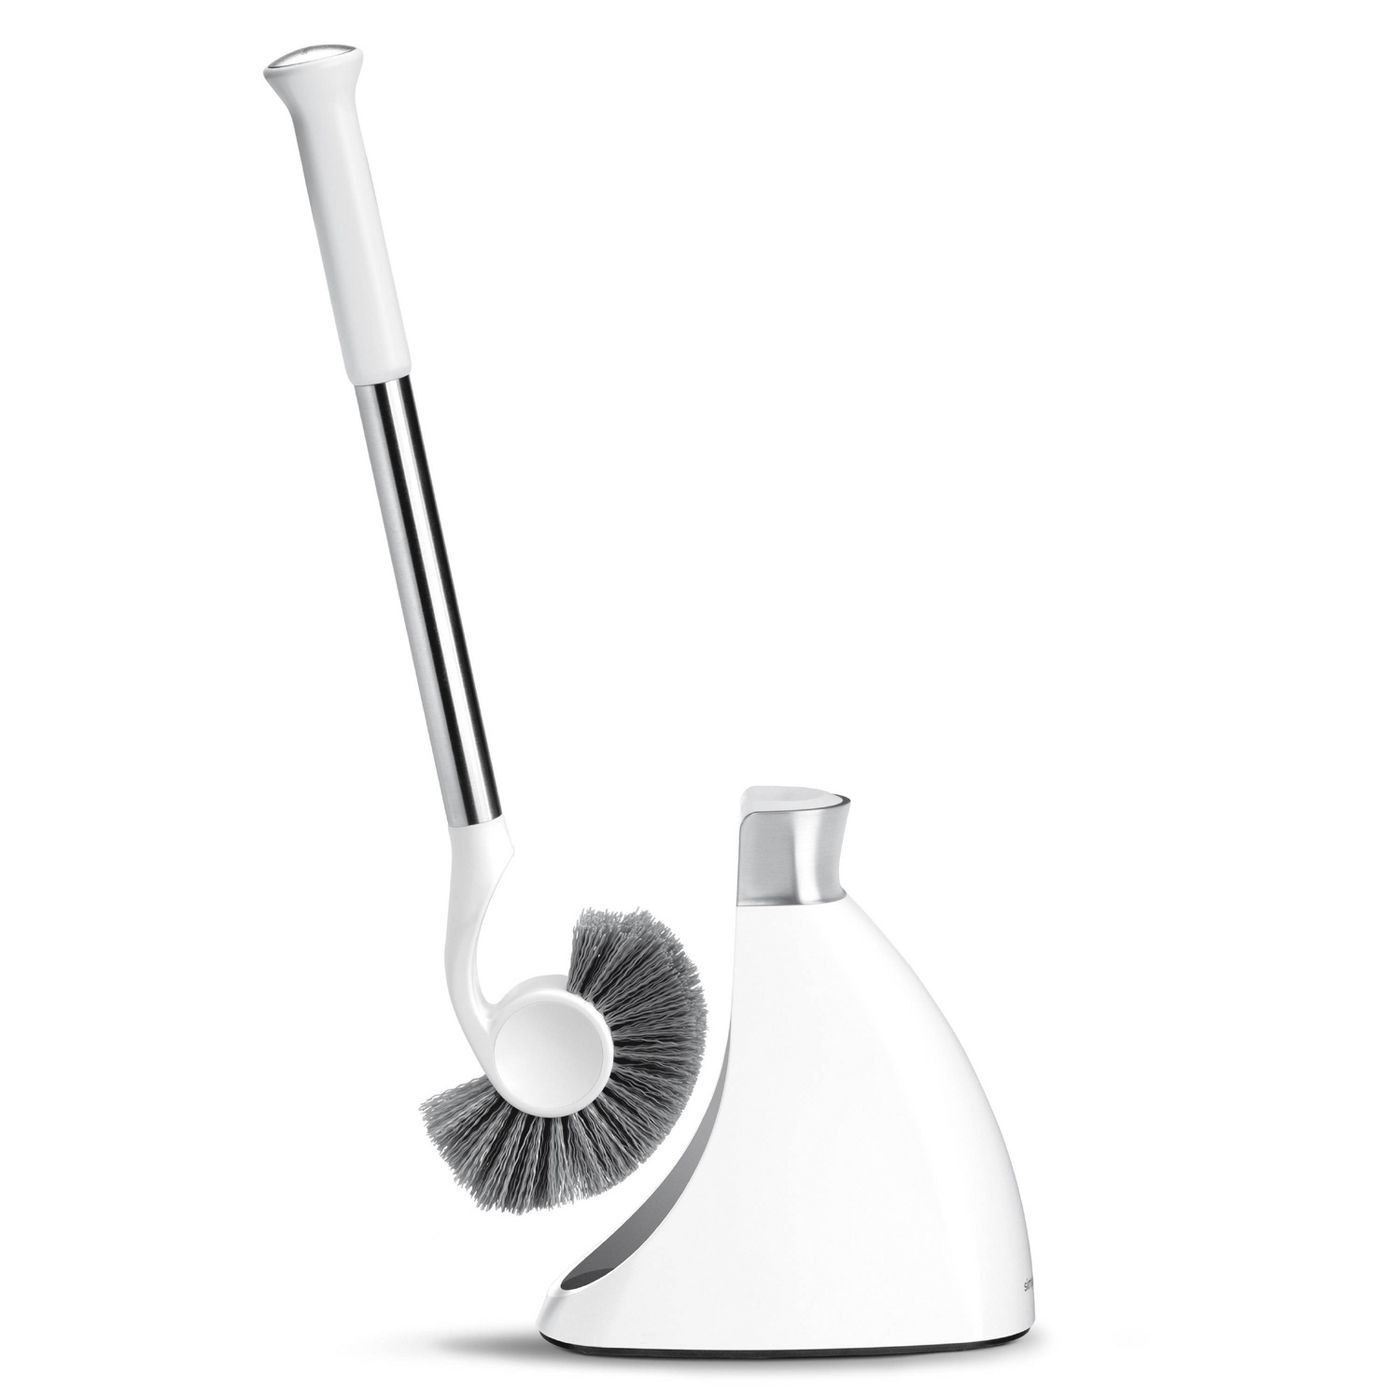 White and silver toilet brush caddy with the white brush with gray bristles